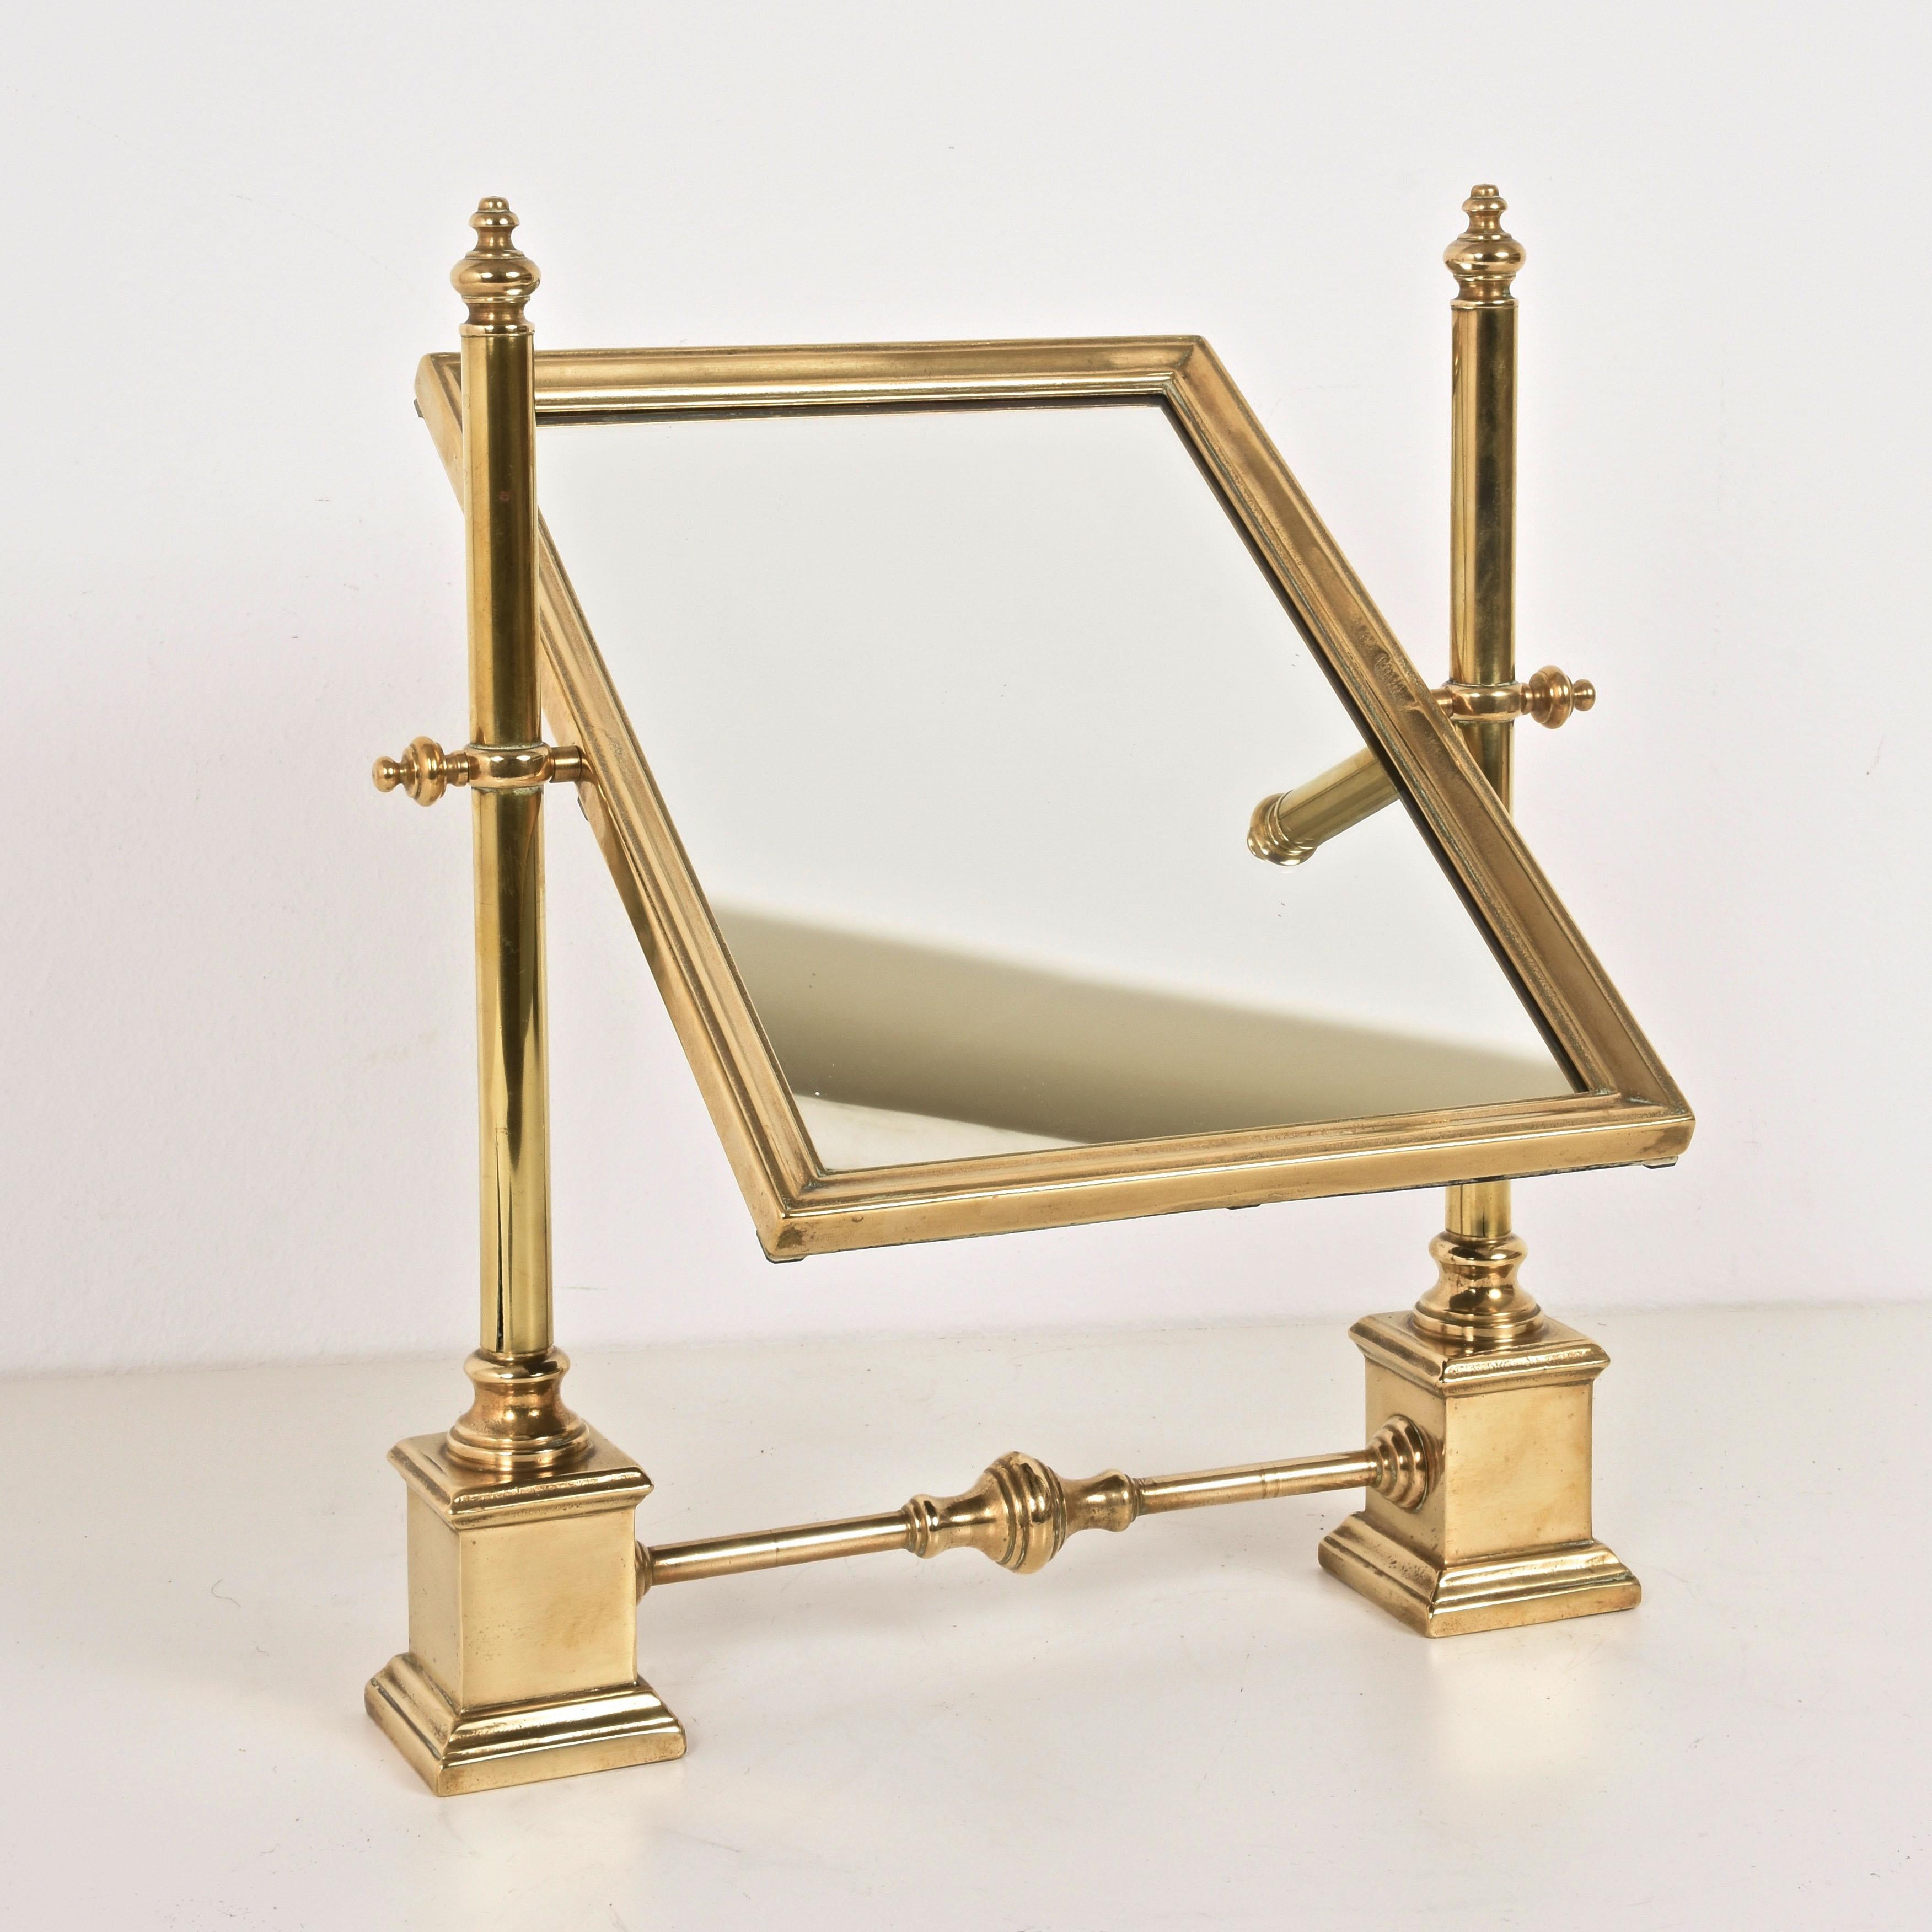 20th Century Table Mirror in Polished Brass, Vanity, Adjustable, Italy, 1950s